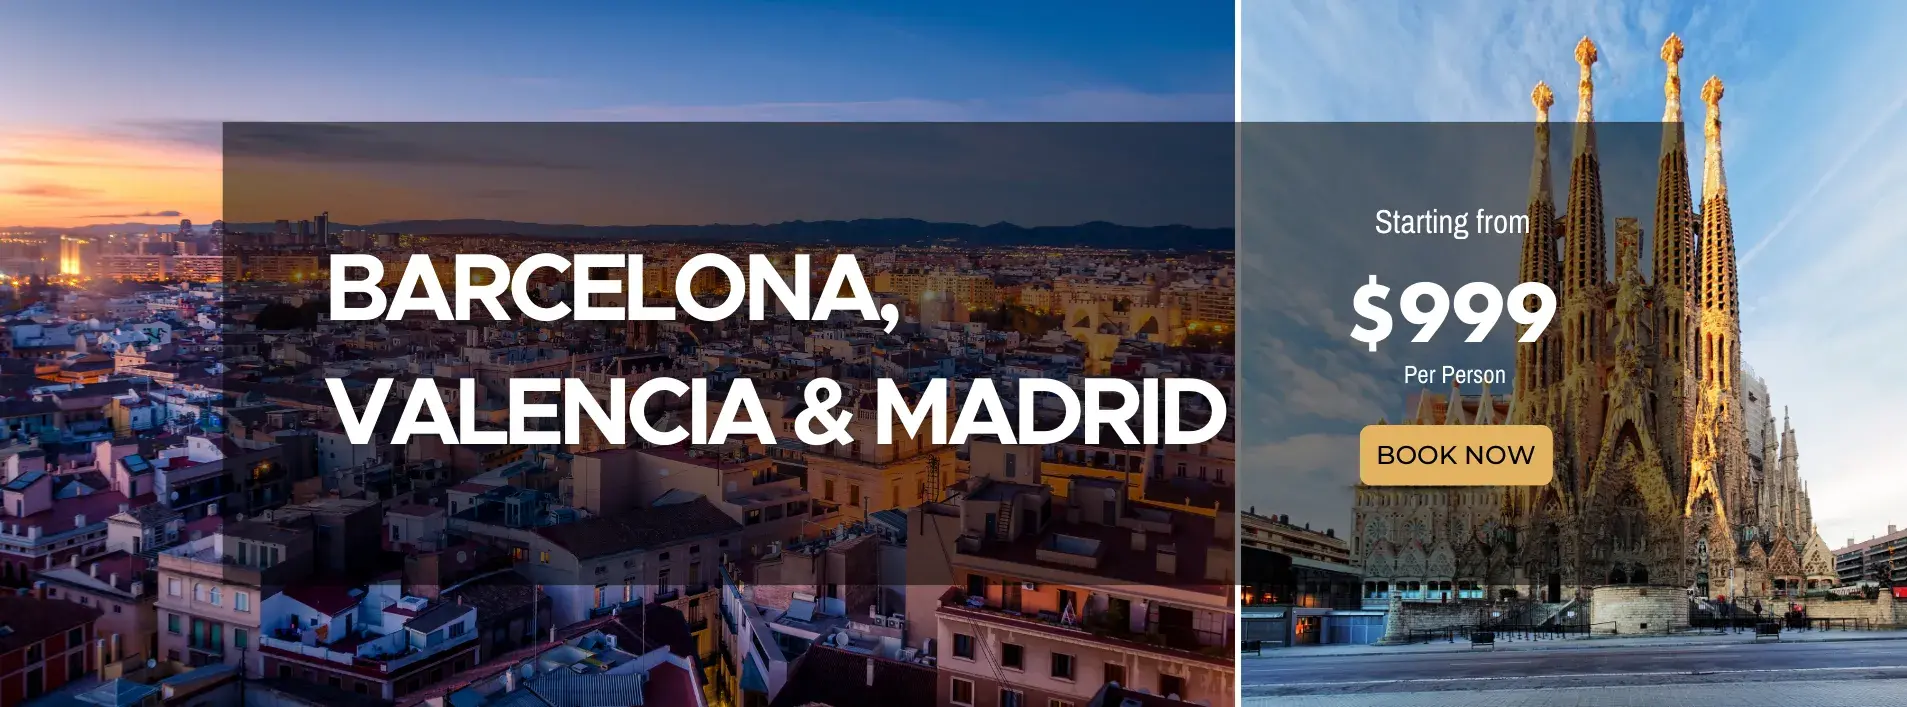 Barcelona, Valencia and Madrid w/air and train